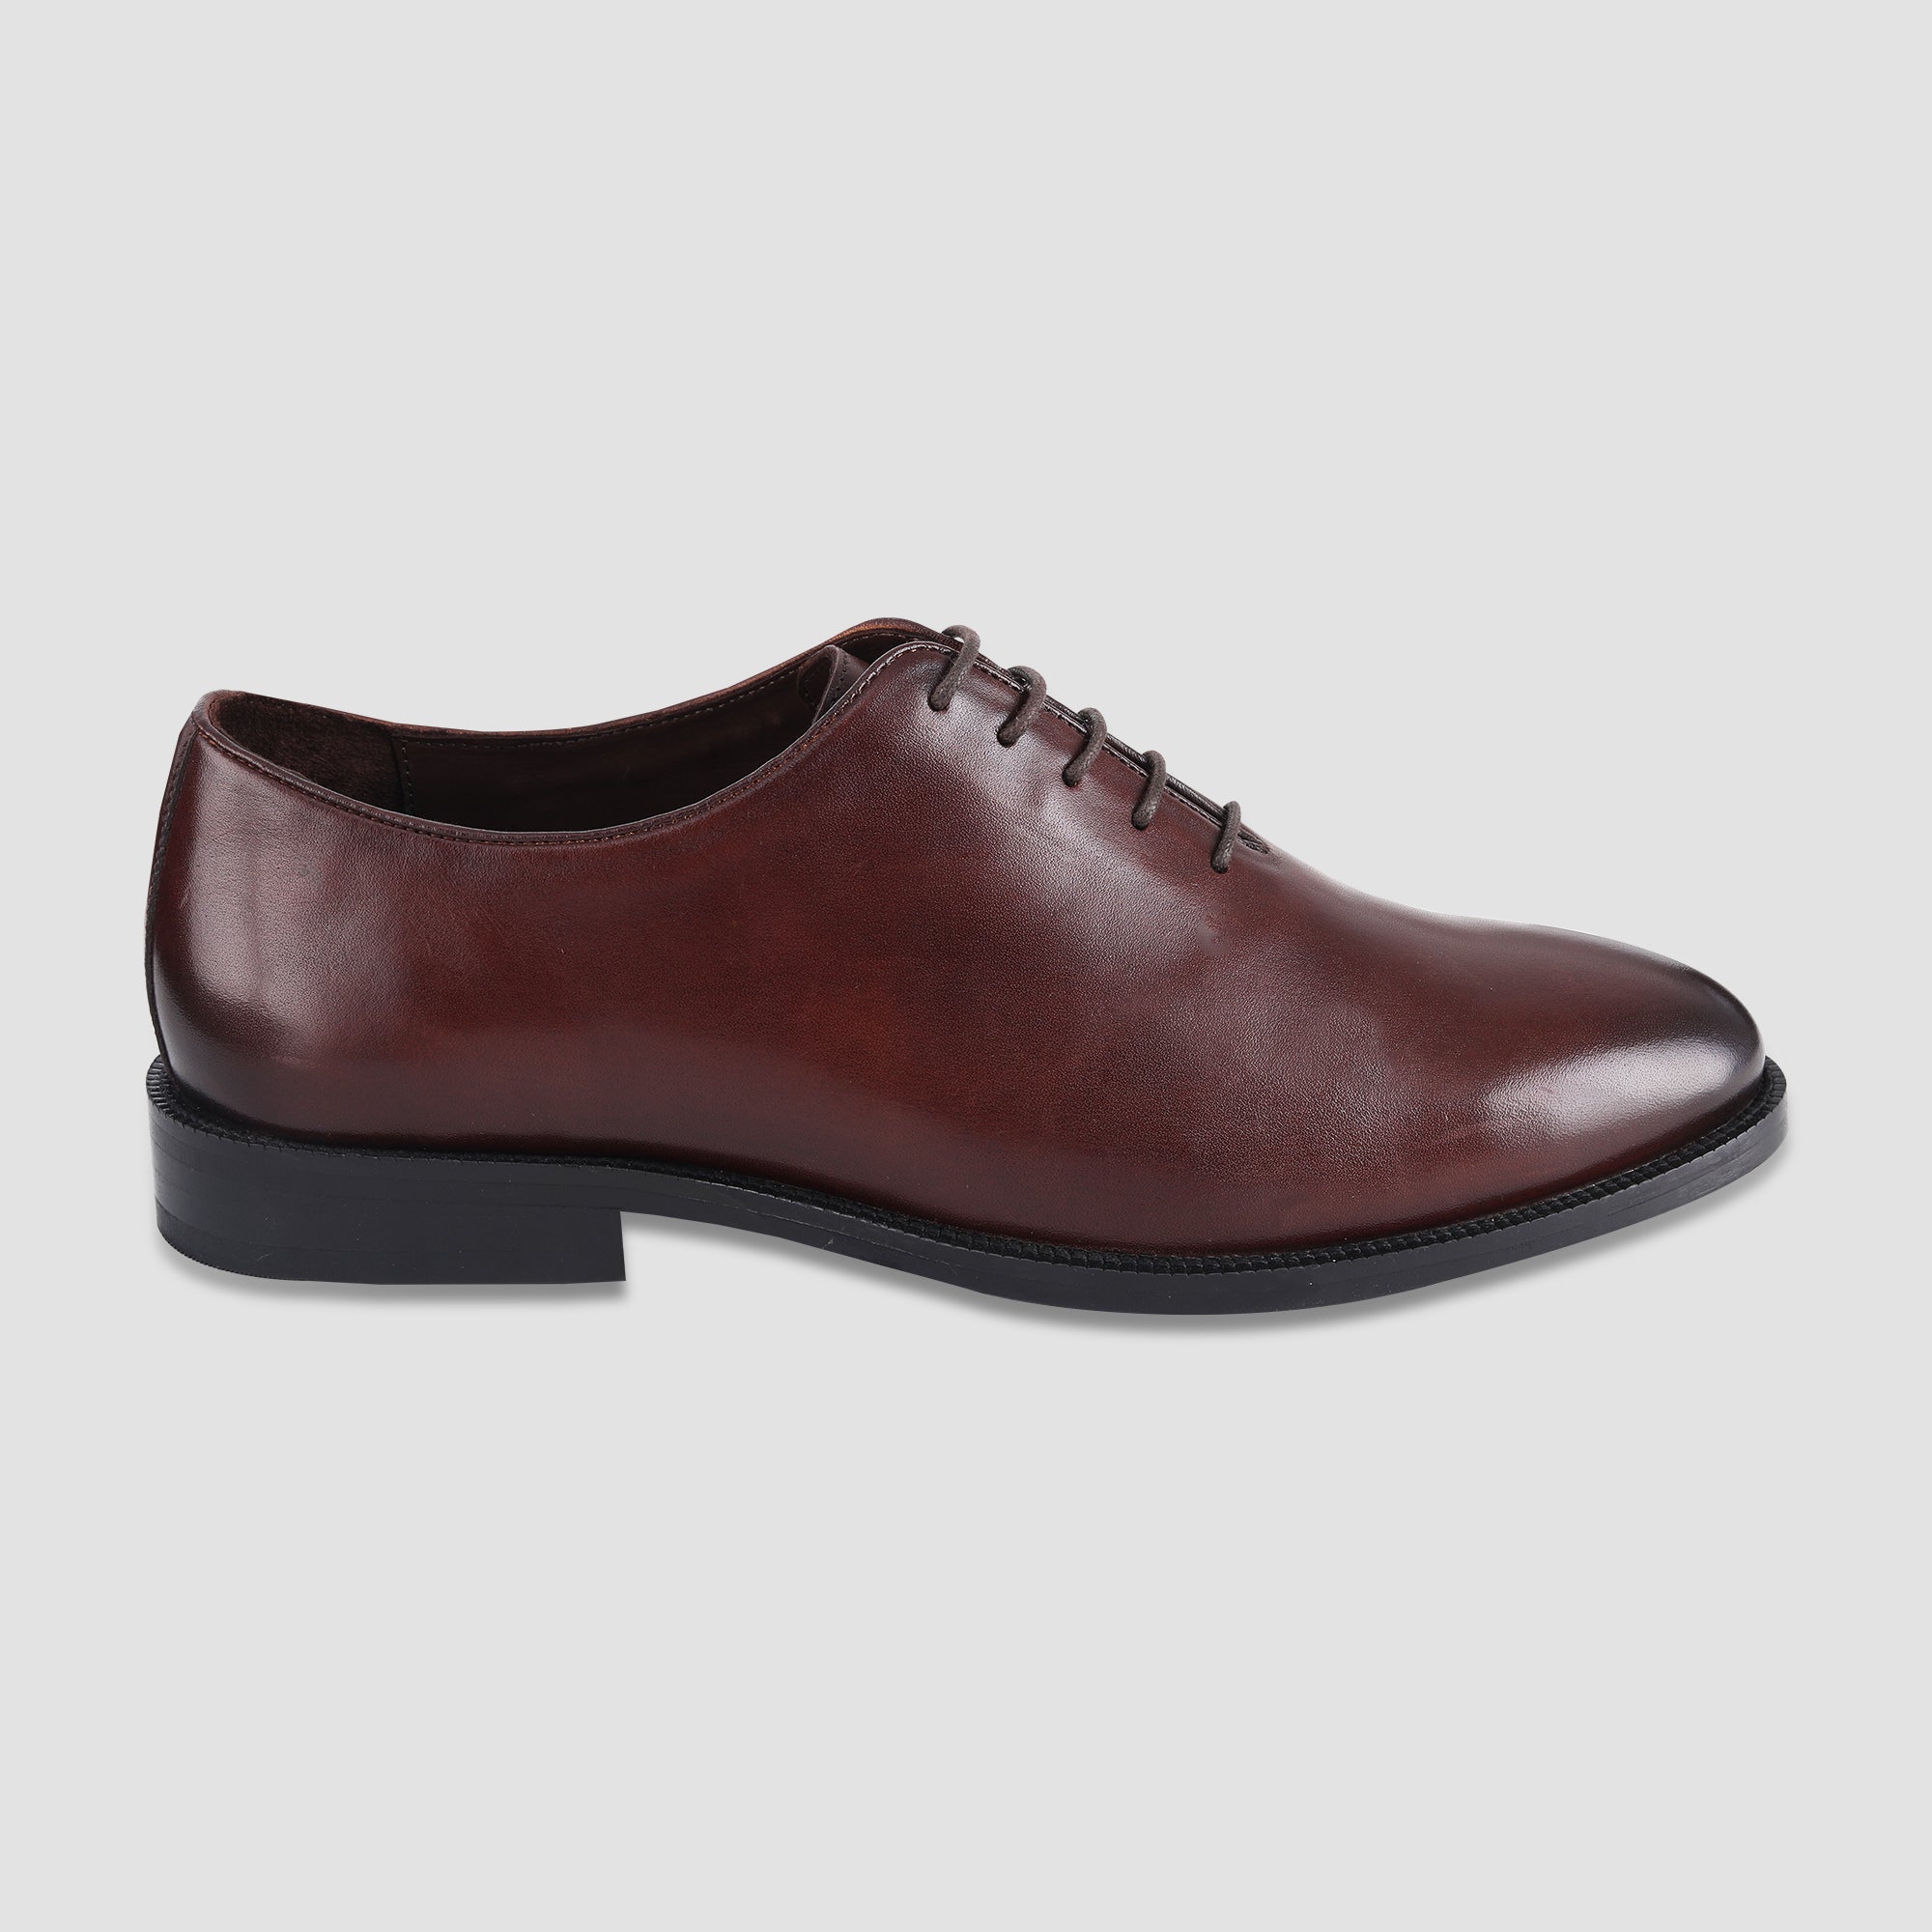 Ezok Brown Leather Formal Shoes For Men